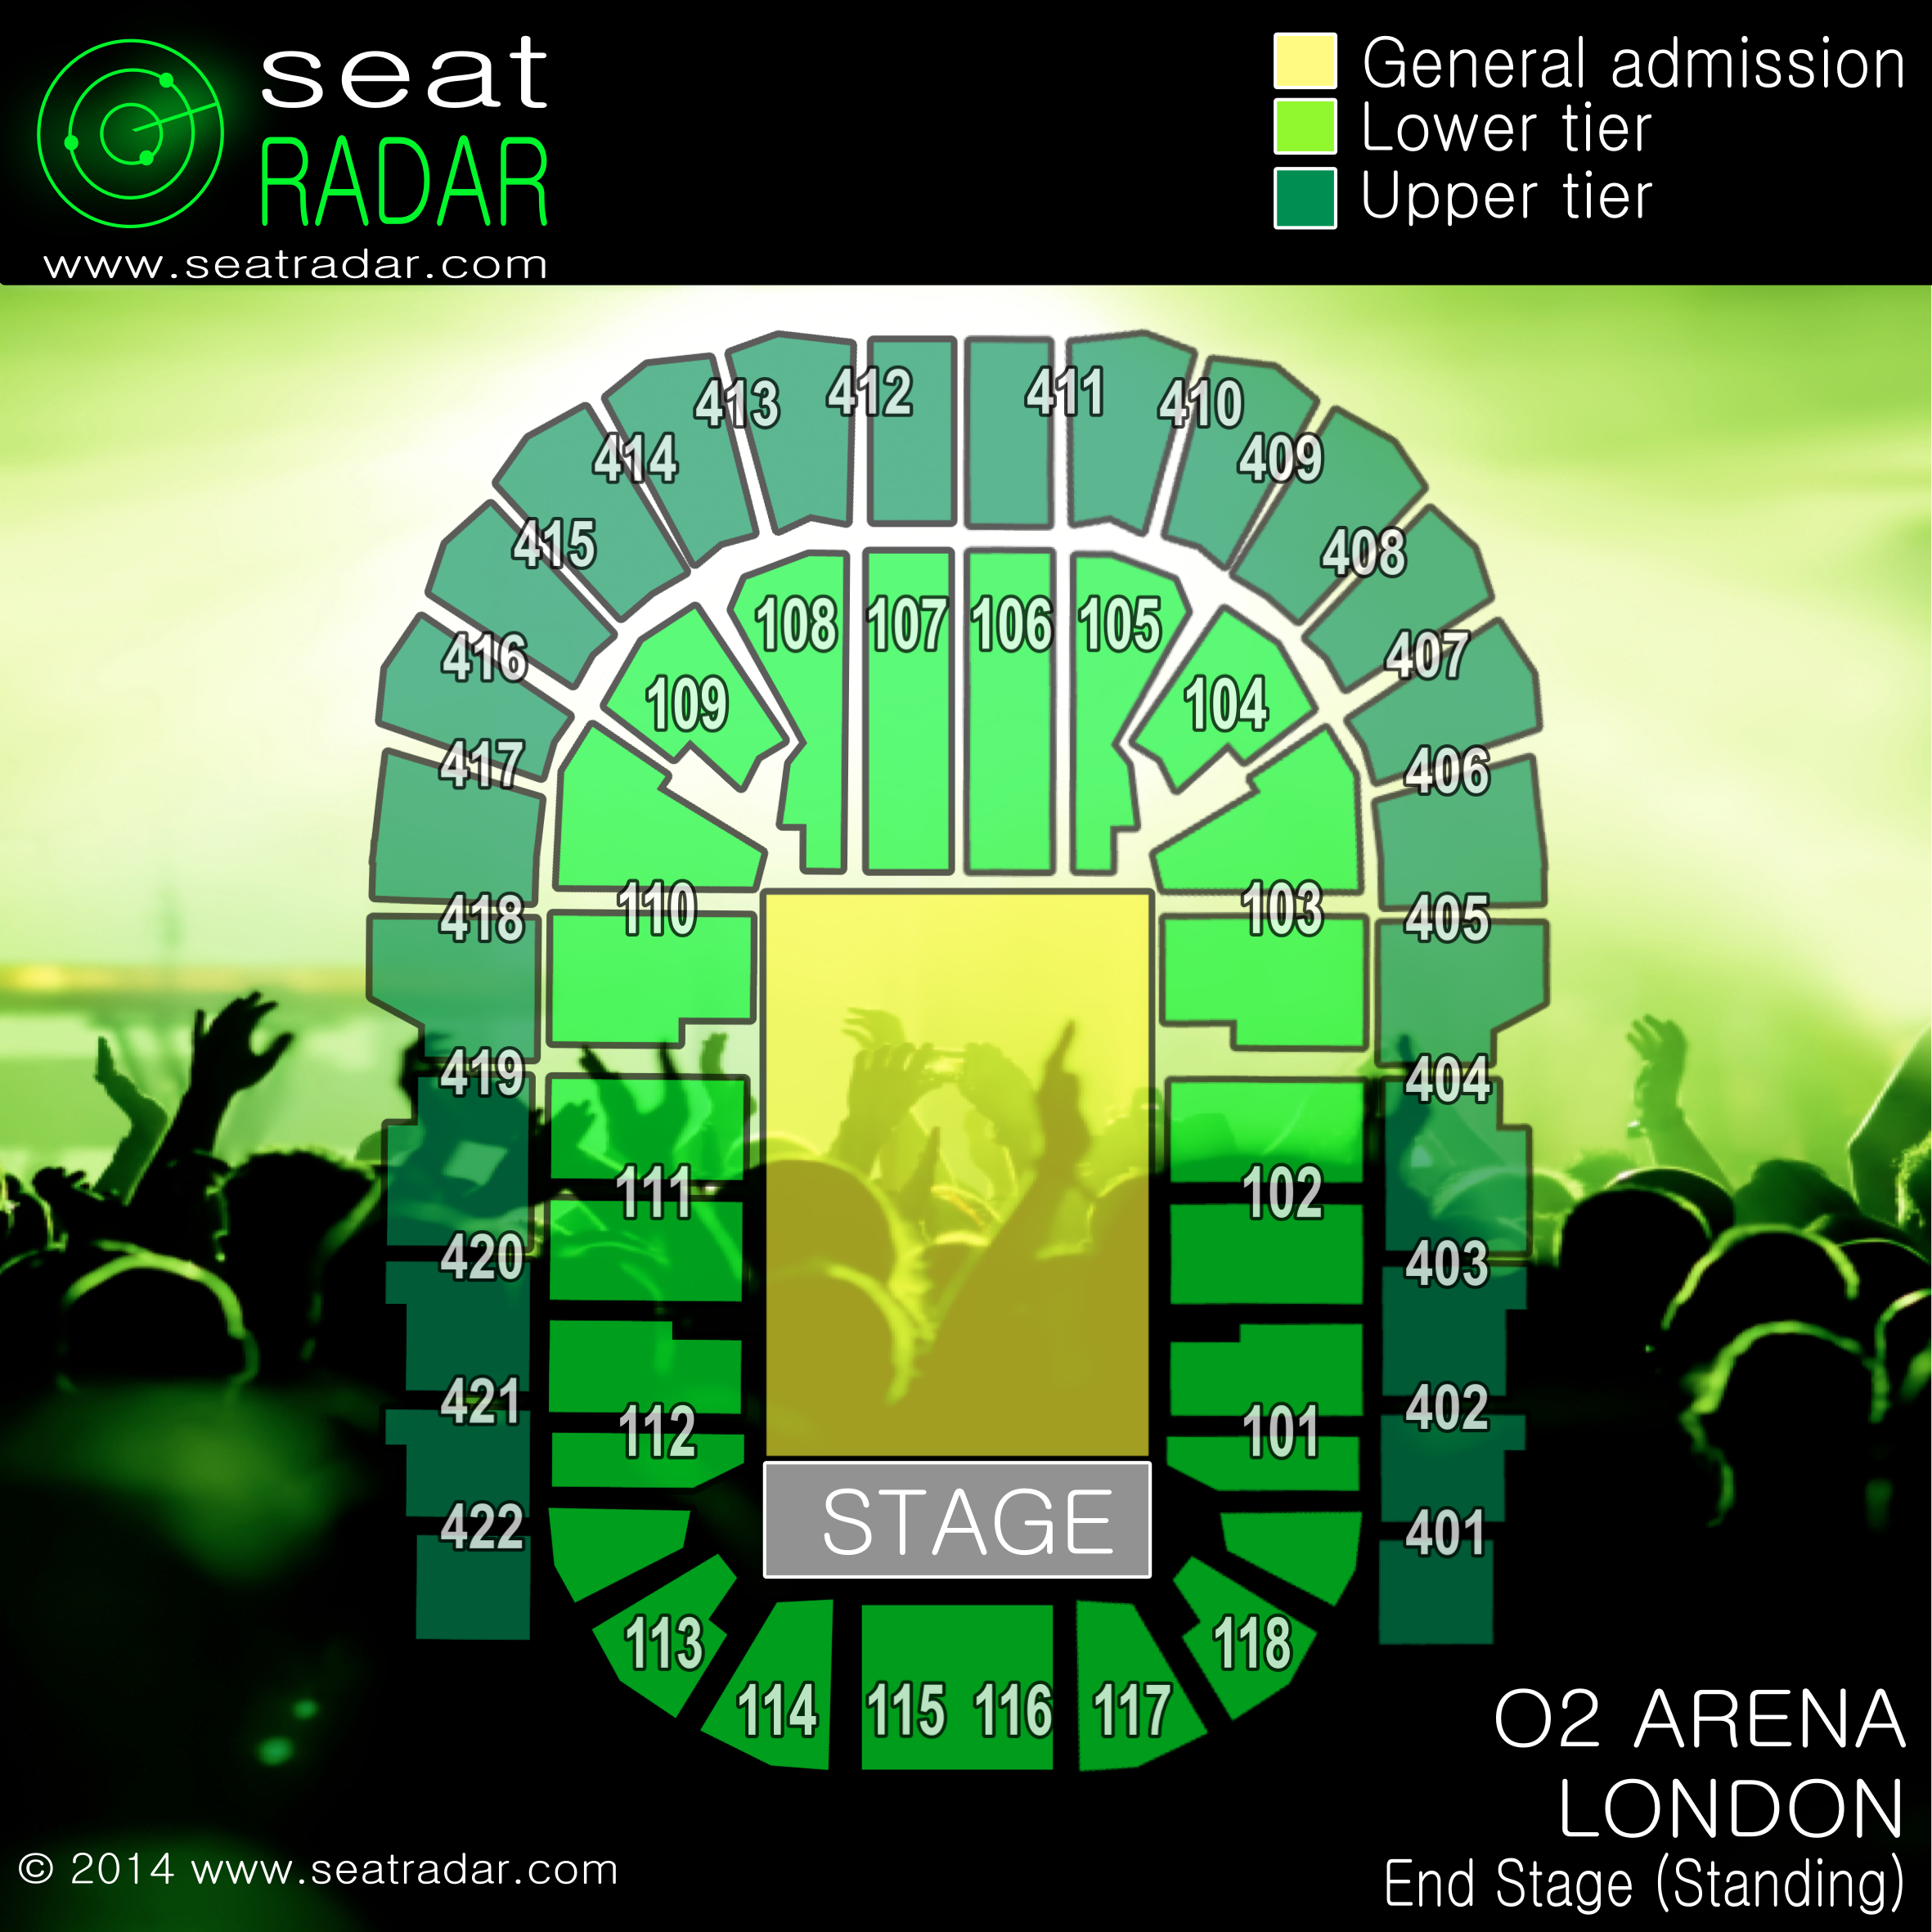 O2 Arena, London - End Stage (Standing)